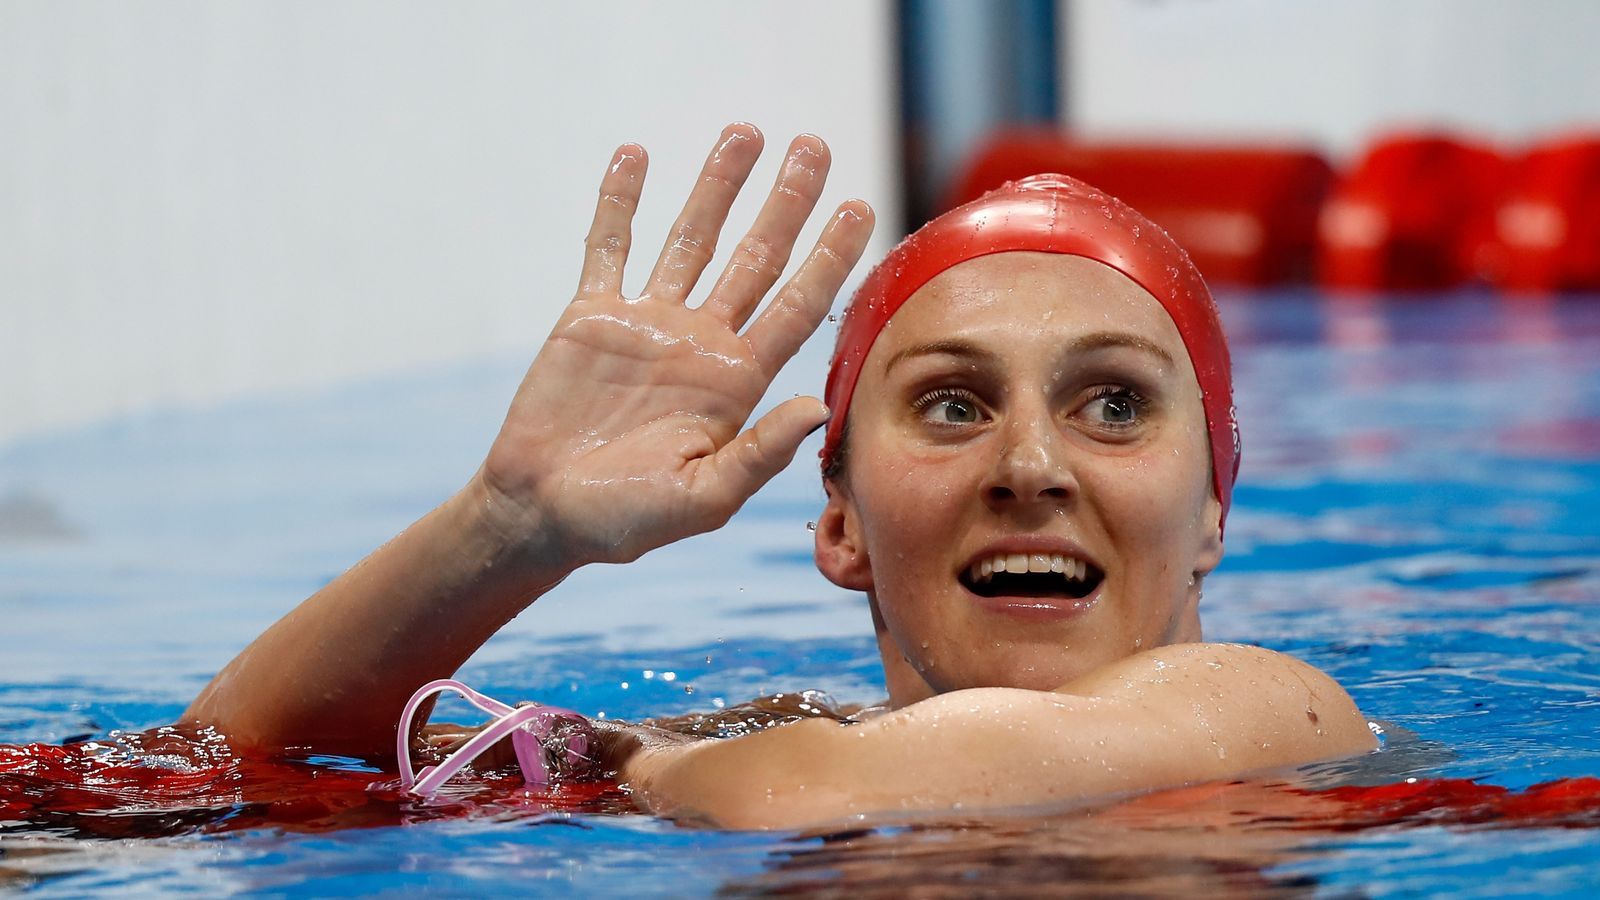 Jazz Carlin Second Behind Katie Ledecky In One Sided Olympic Swimming